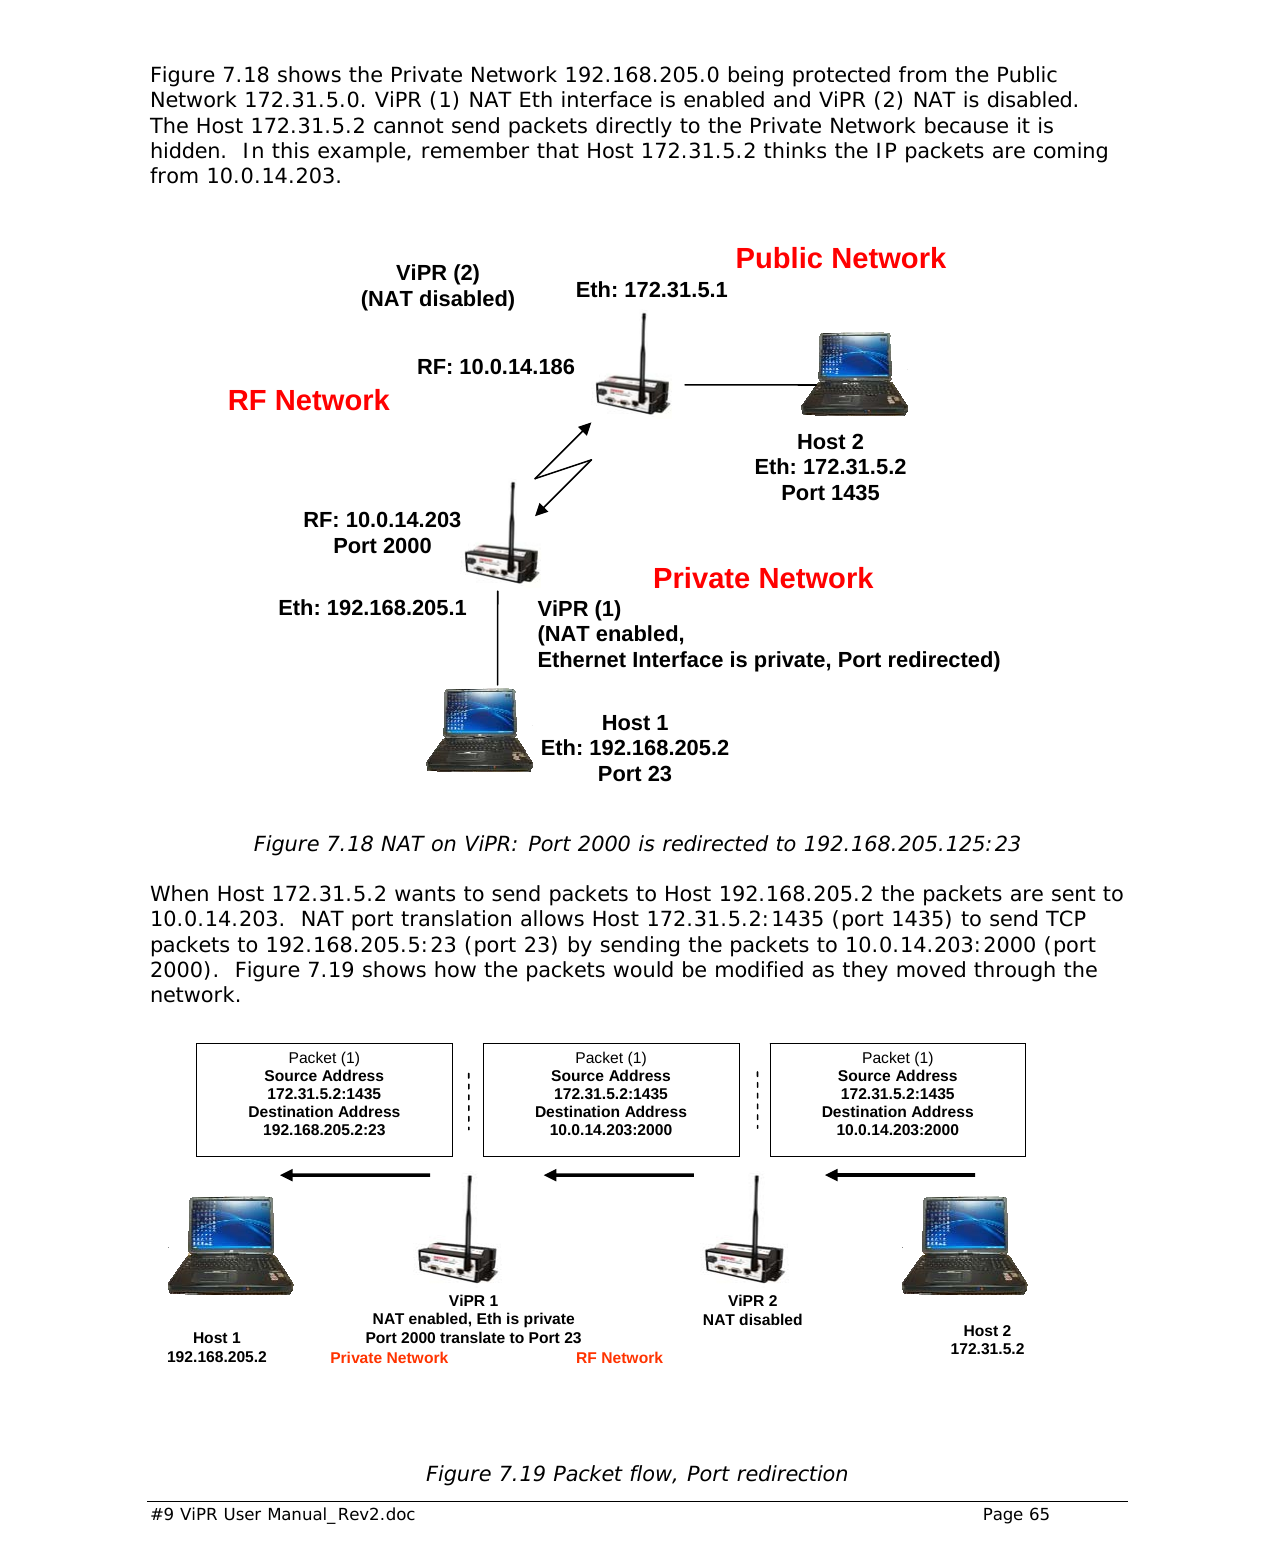  #9 ViPR User Manual_Rev2.doc    Page 65  Figure 7.18 shows the Private Network 192.168.205.0 being protected from the Public Network 172.31.5.0. ViPR (1) NAT Eth interface is enabled and ViPR (2) NAT is disabled.  The Host 172.31.5.2 cannot send packets directly to the Private Network because it is hidden.  In this example, remember that Host 172.31.5.2 thinks the IP packets are coming from 10.0.14.203.               Figure 7.18 NAT on ViPR: Port 2000 is redirected to 192.168.205.125:23  When Host 172.31.5.2 wants to send packets to Host 192.168.205.2 the packets are sent to 10.0.14.203.  NAT port translation allows Host 172.31.5.2:1435 (port 1435) to send TCP packets to 192.168.205.5:23 (port 23) by sending the packets to 10.0.14.203:2000 (port 2000).  Figure 7.19 shows how the packets would be modified as they moved through the network.            Figure 7.19 Packet flow, Port redirection  Packet (1) Source Address  172.31.5.2:1435 Destination Address 192.168.205.2:23 Packet (1) Source Address 172.31.5.2:1435 Destination Address 10.0.14.203:2000 Packet (1) Source Address 172.31.5.2:1435 Destination Address 10.0.14.203:2000 Host 1  192.168.205.2 Host 2  172.31.5.2 ViPR 1 NAT enabled, Eth is private Port 2000 translate to Port 23 ViPR 2 NAT disabled  Private Network   RF Network Eth: 172.31.5.1 RF: 10.0.14.203 Port 2000 RF: 10.0.14.186Eth: 192.168.205.1 Host 2 Eth: 172.31.5.2 Port 1435 ViPR (2) (NAT disabled) Private NetworkHost 1 Eth: 192.168.205.2 Port 23 Public Network RF Network ViPR (1) (NAT enabled,  Ethernet Interface is private, Port redirected) 